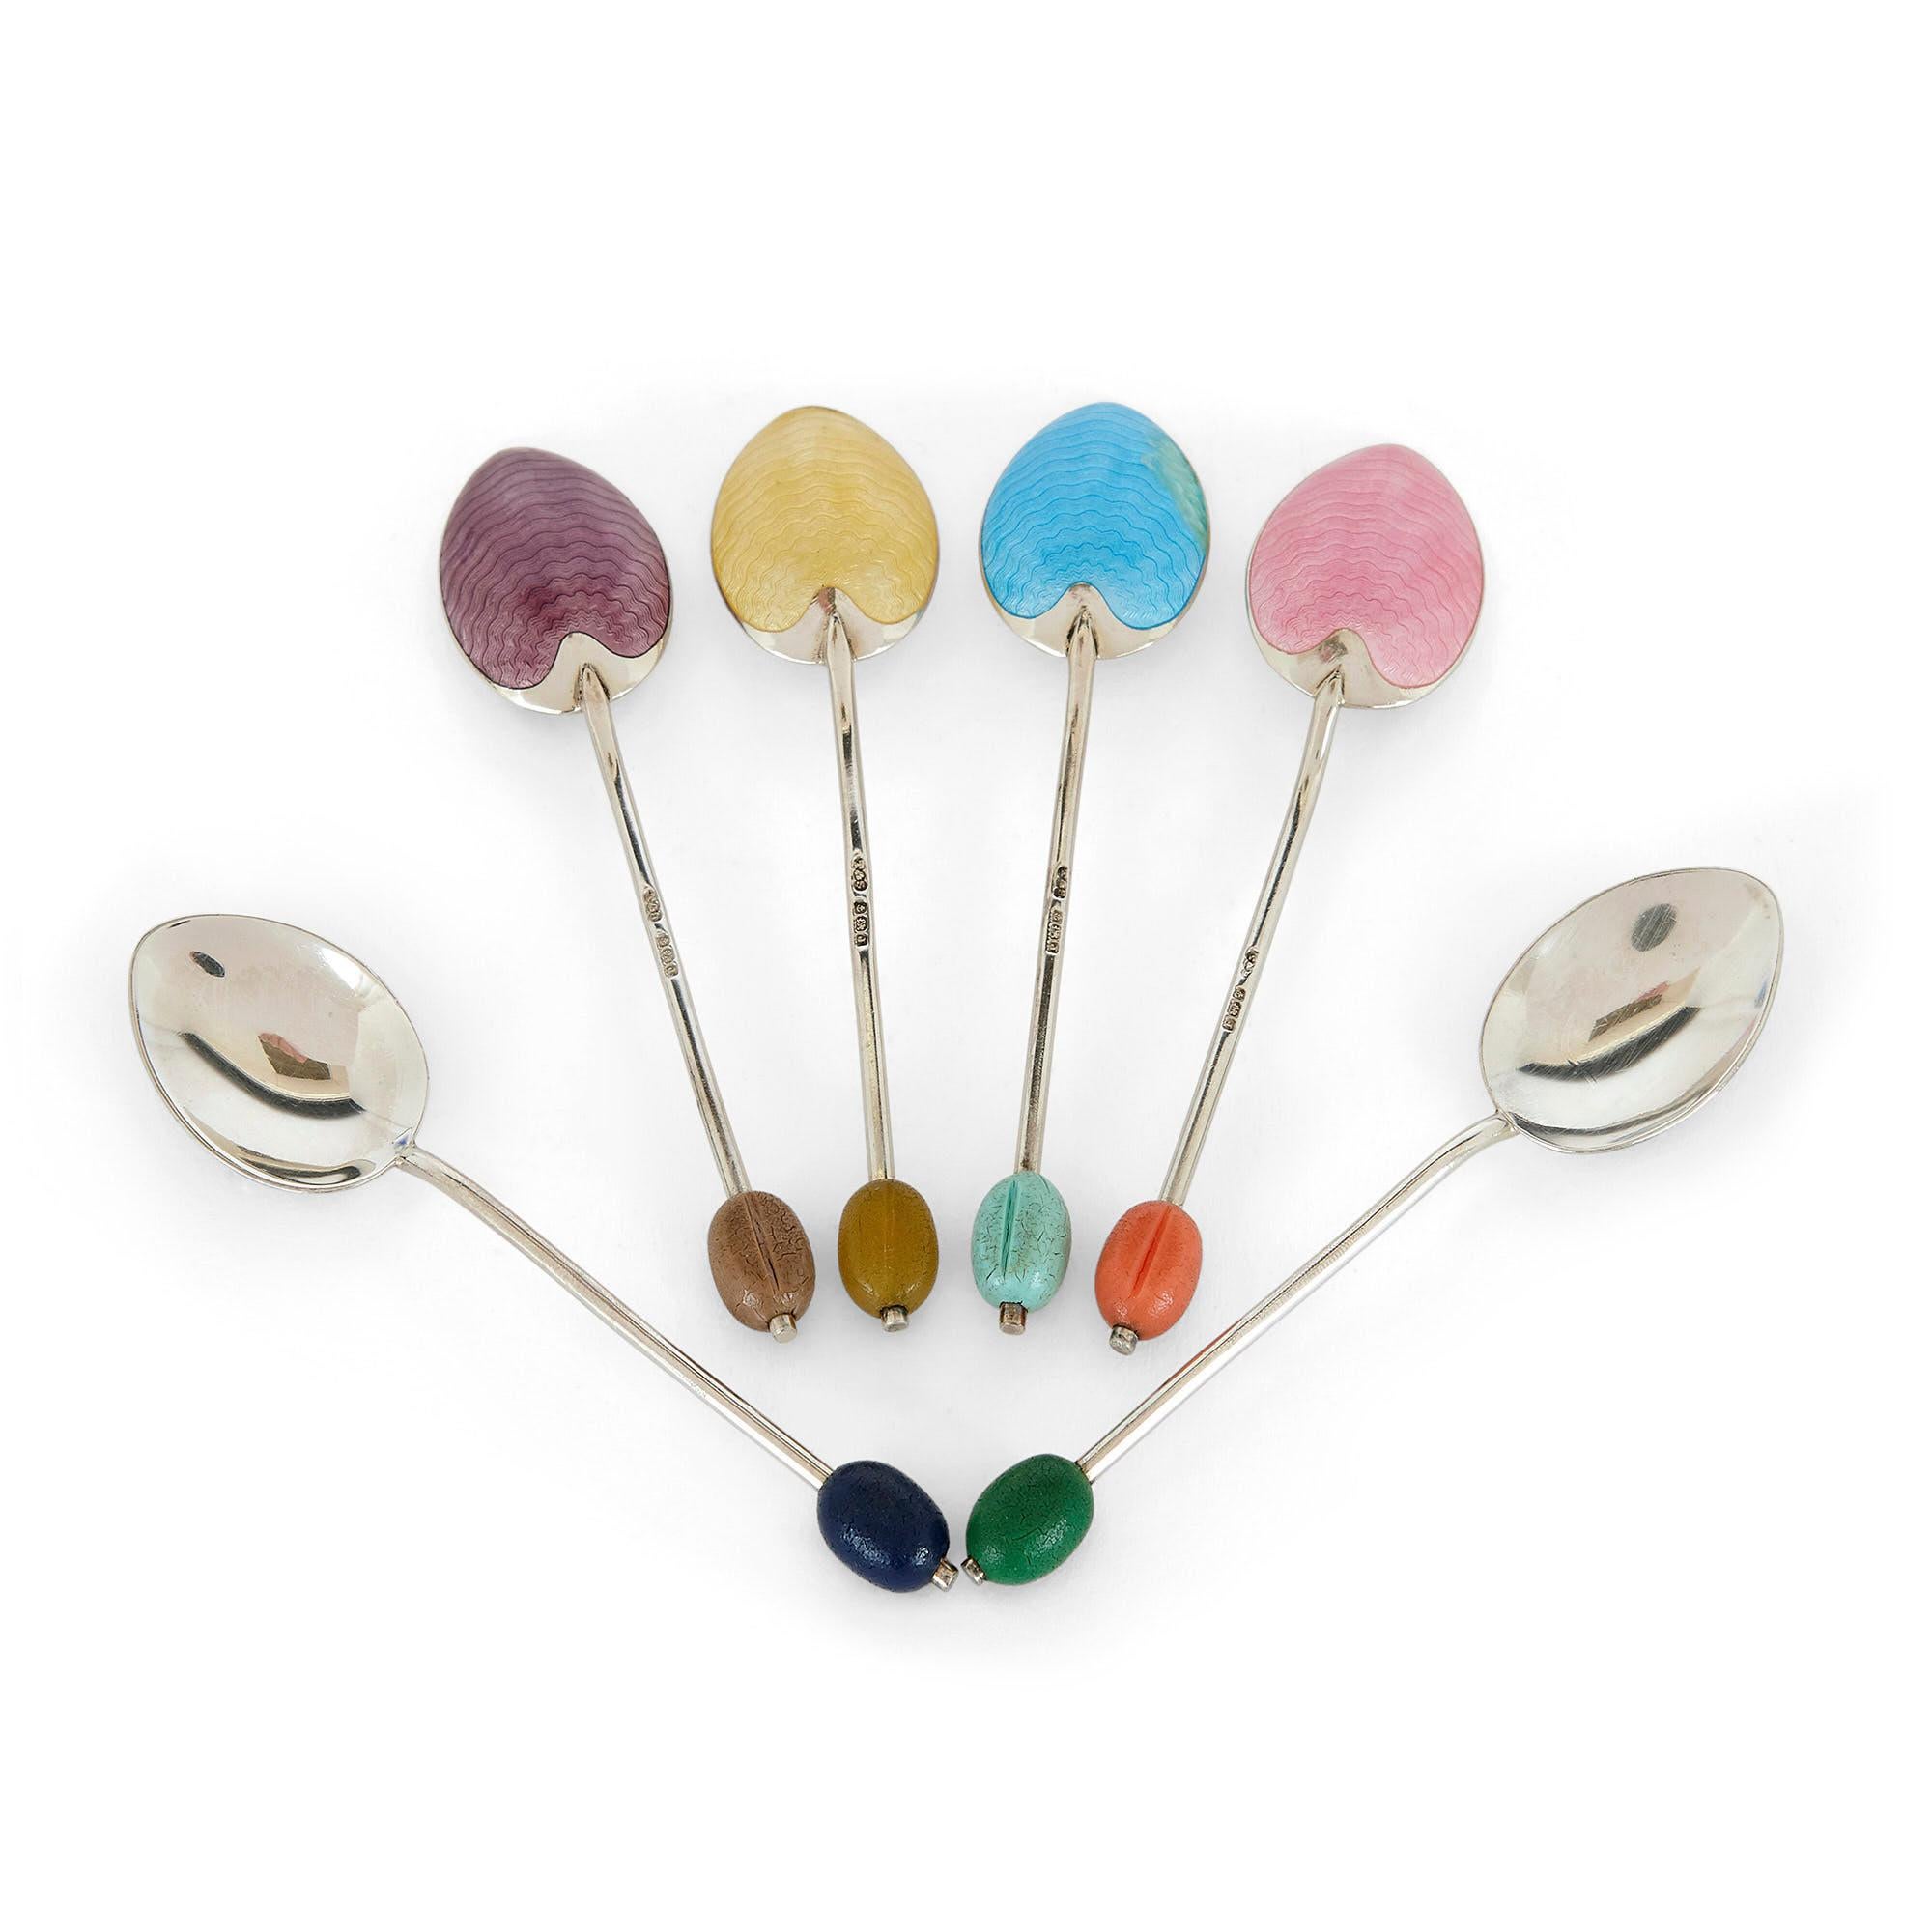 Set of six Birmingham coloured enamel and silver spoons
English, 1933
Spoon: Length 10cm, width 3cm
Case: Height 2cm, width 16cm, depth 13cm

This beautiful set of spoons is by the English silversmiths Turner and Simpson. The silver spoons